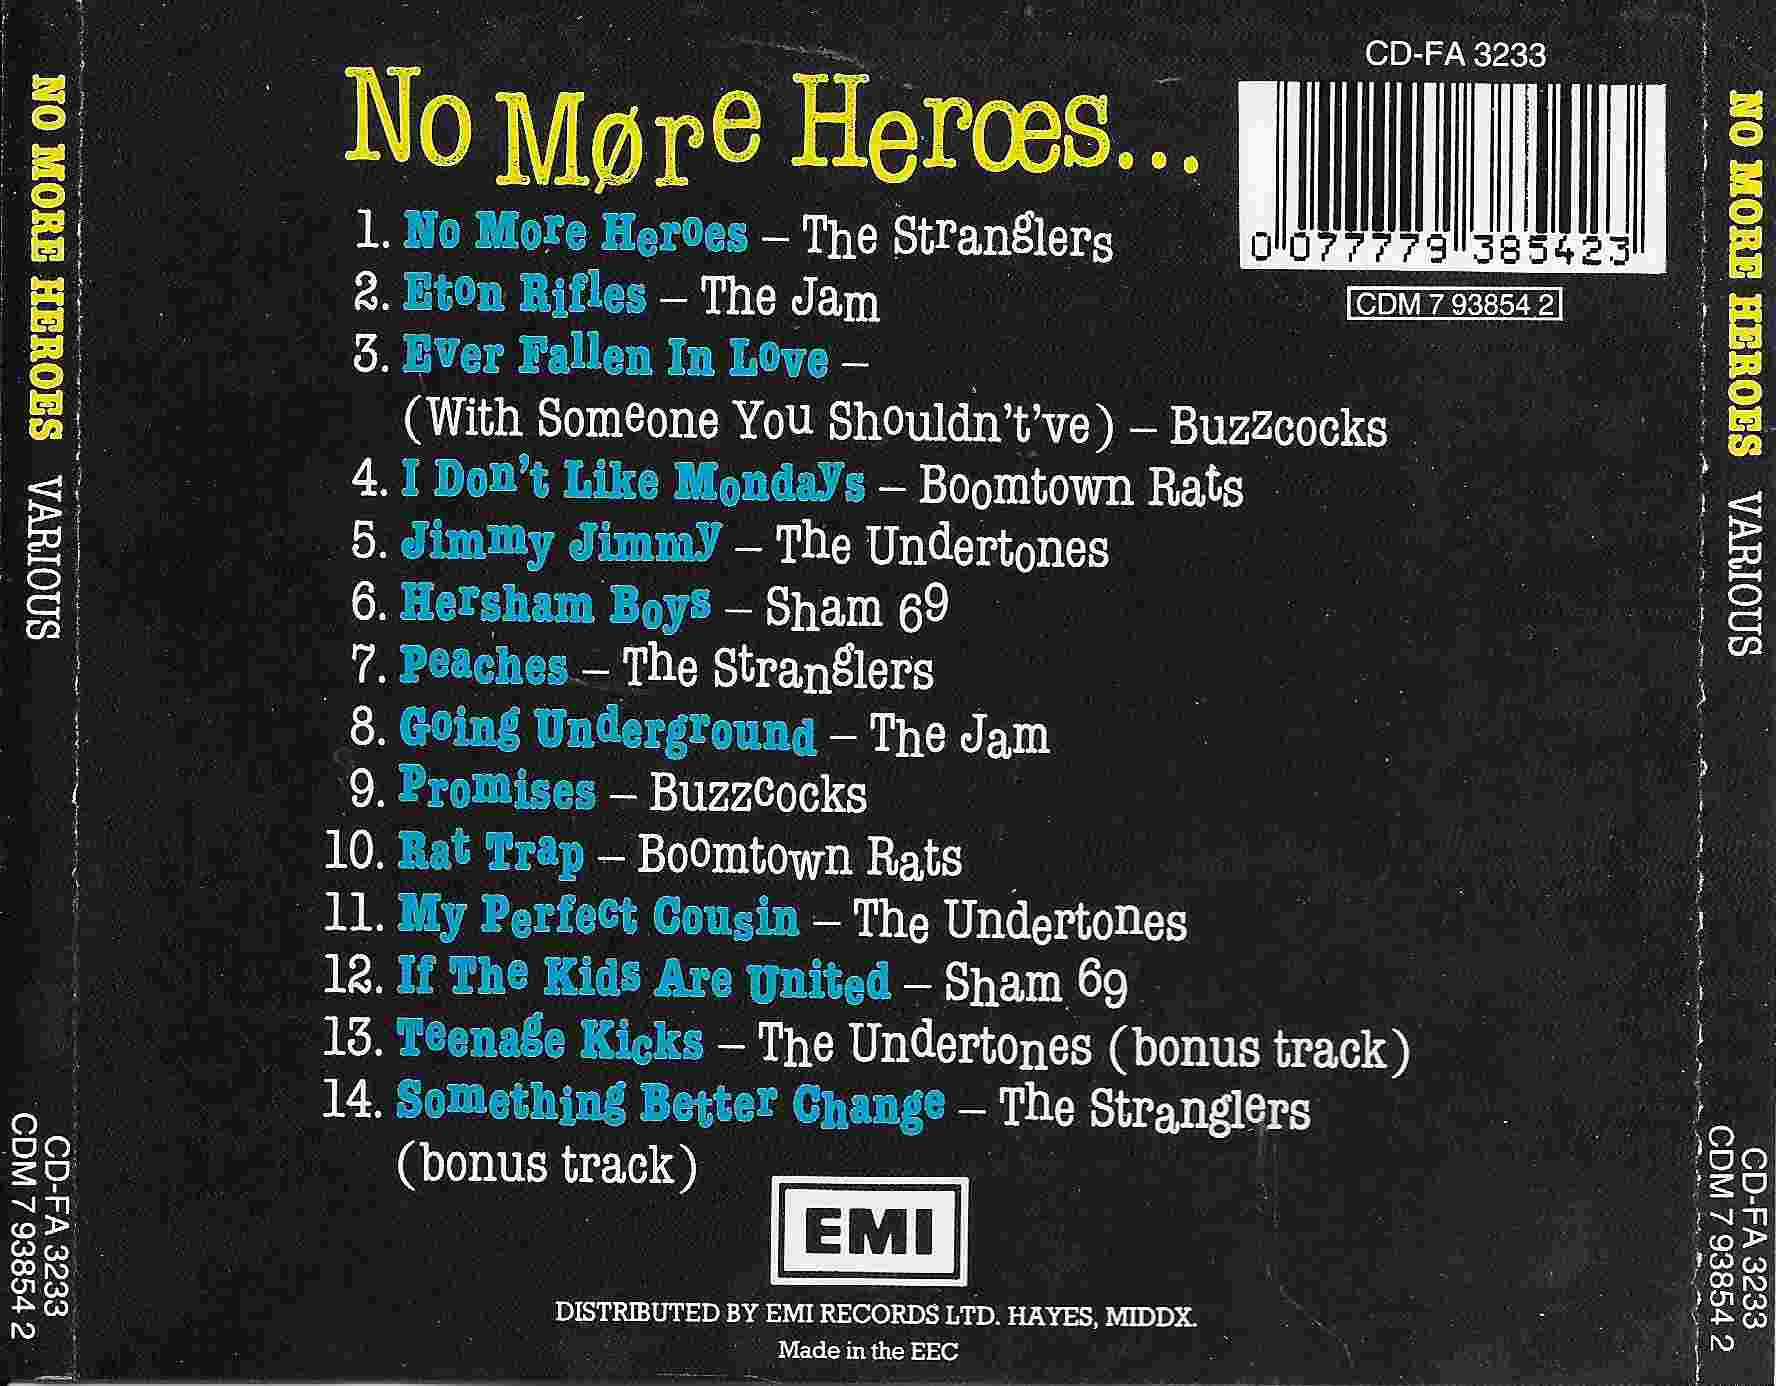 Picture of CDM 7938542 No more heroes by artist Various 